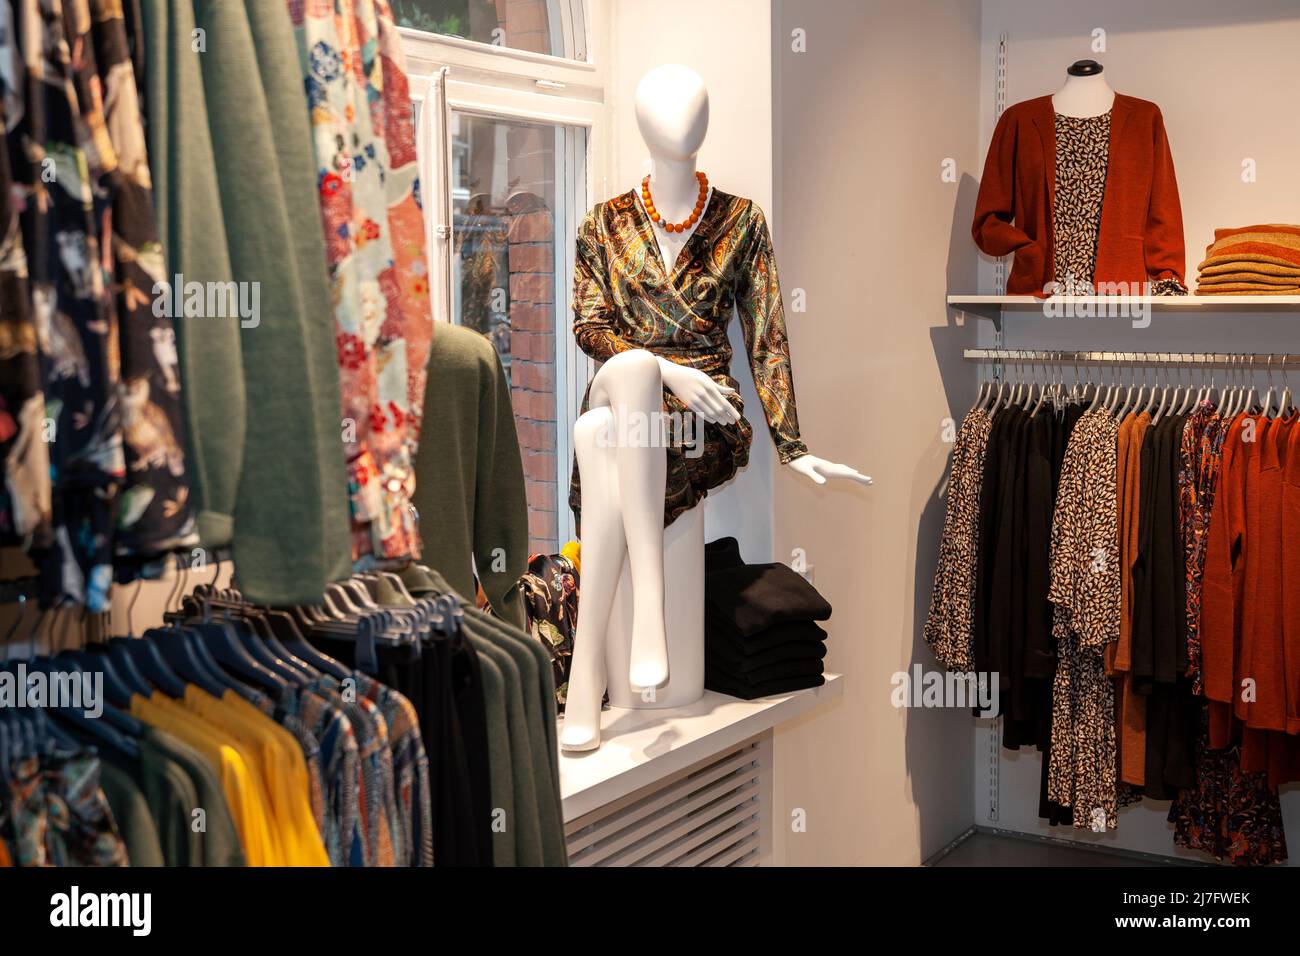 View of clothes shop interior Stock Photo